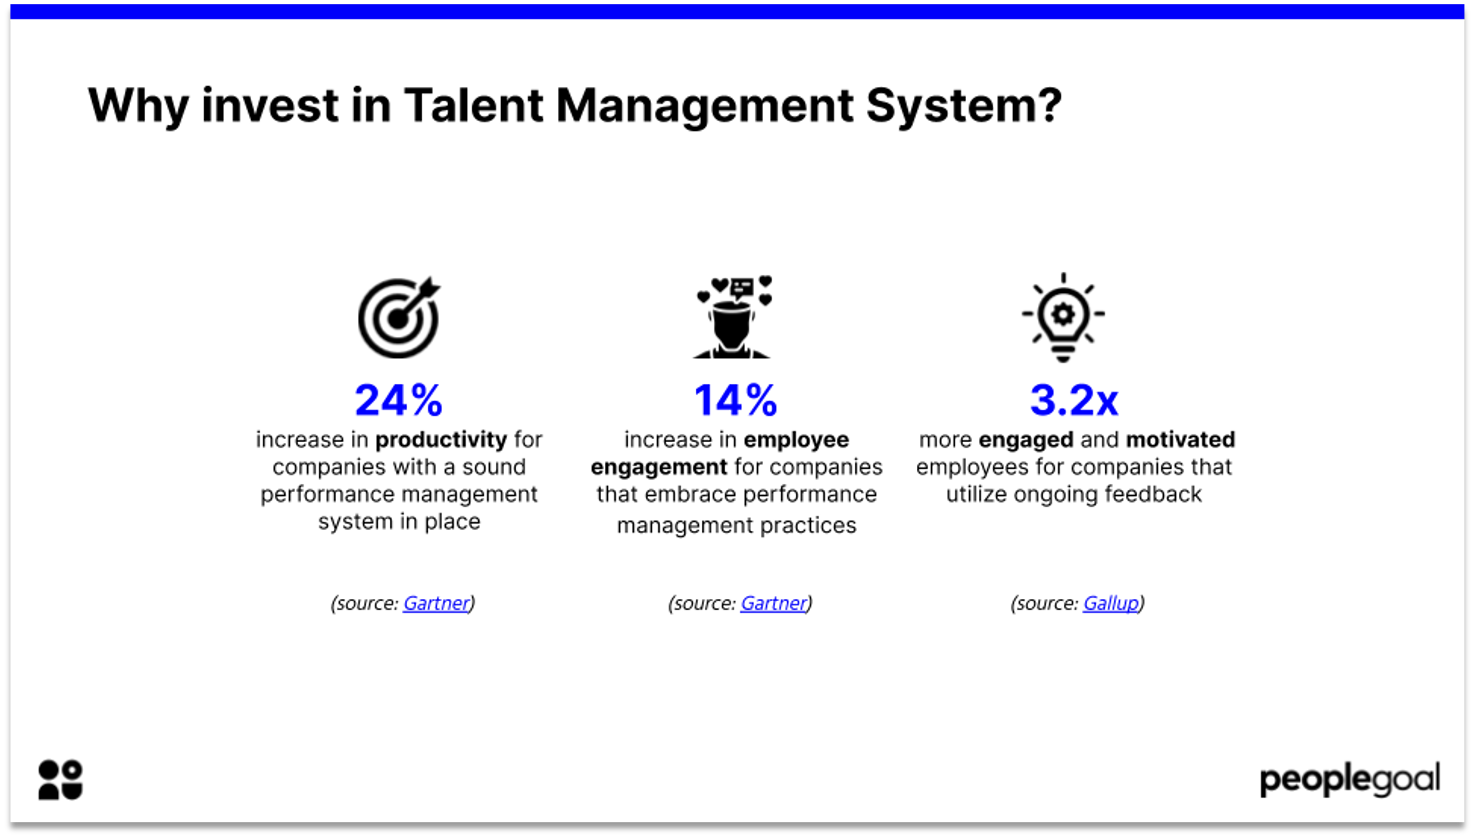 Why invest in a talent management system